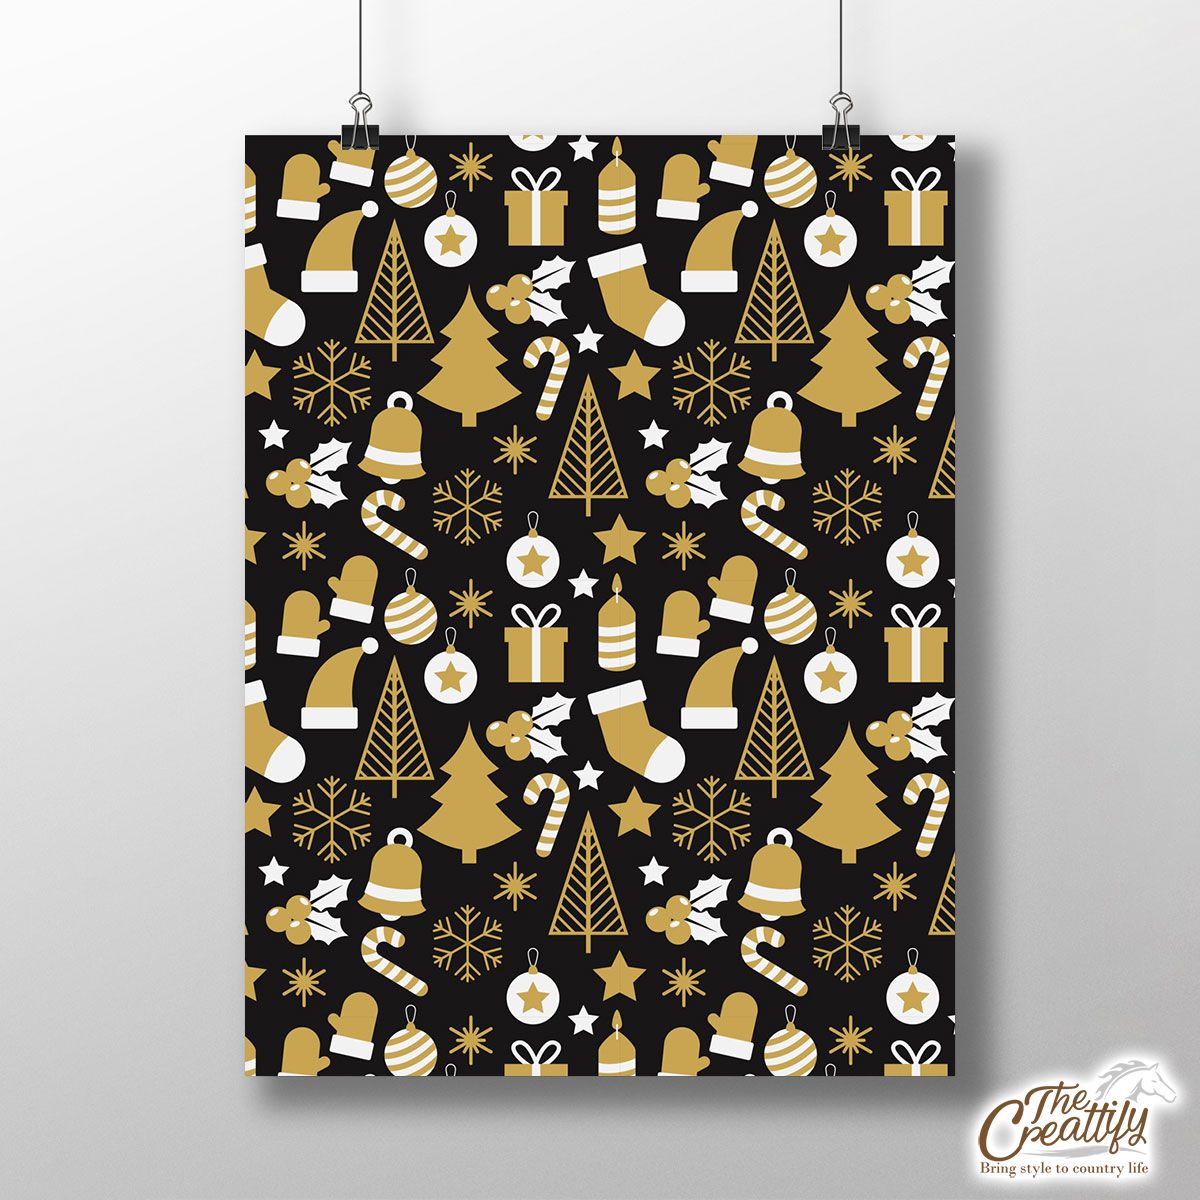 White And Gold Christmas Socks, Christmas Tree, Candy Cane On Black Background Poster